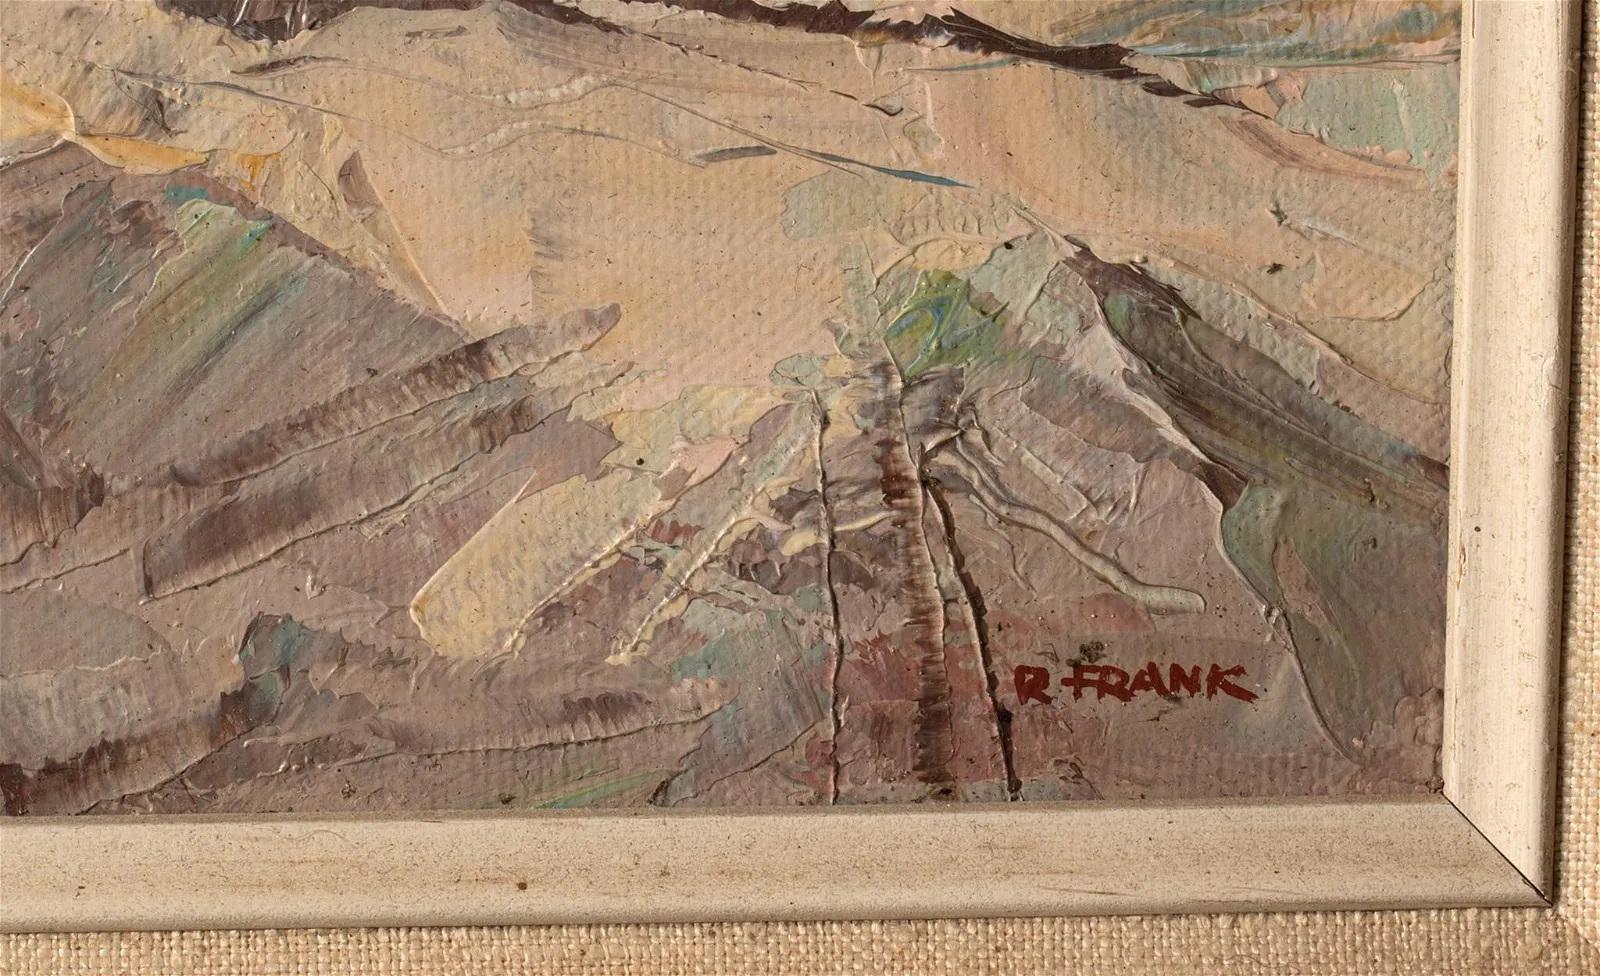 Late 20th century oil on canvas impressionist coastal landscape painting.  Signed R Frank lower right corner, lots of palette knife work.  Displayed in ornate gray wash wood frame, opening size 9.5